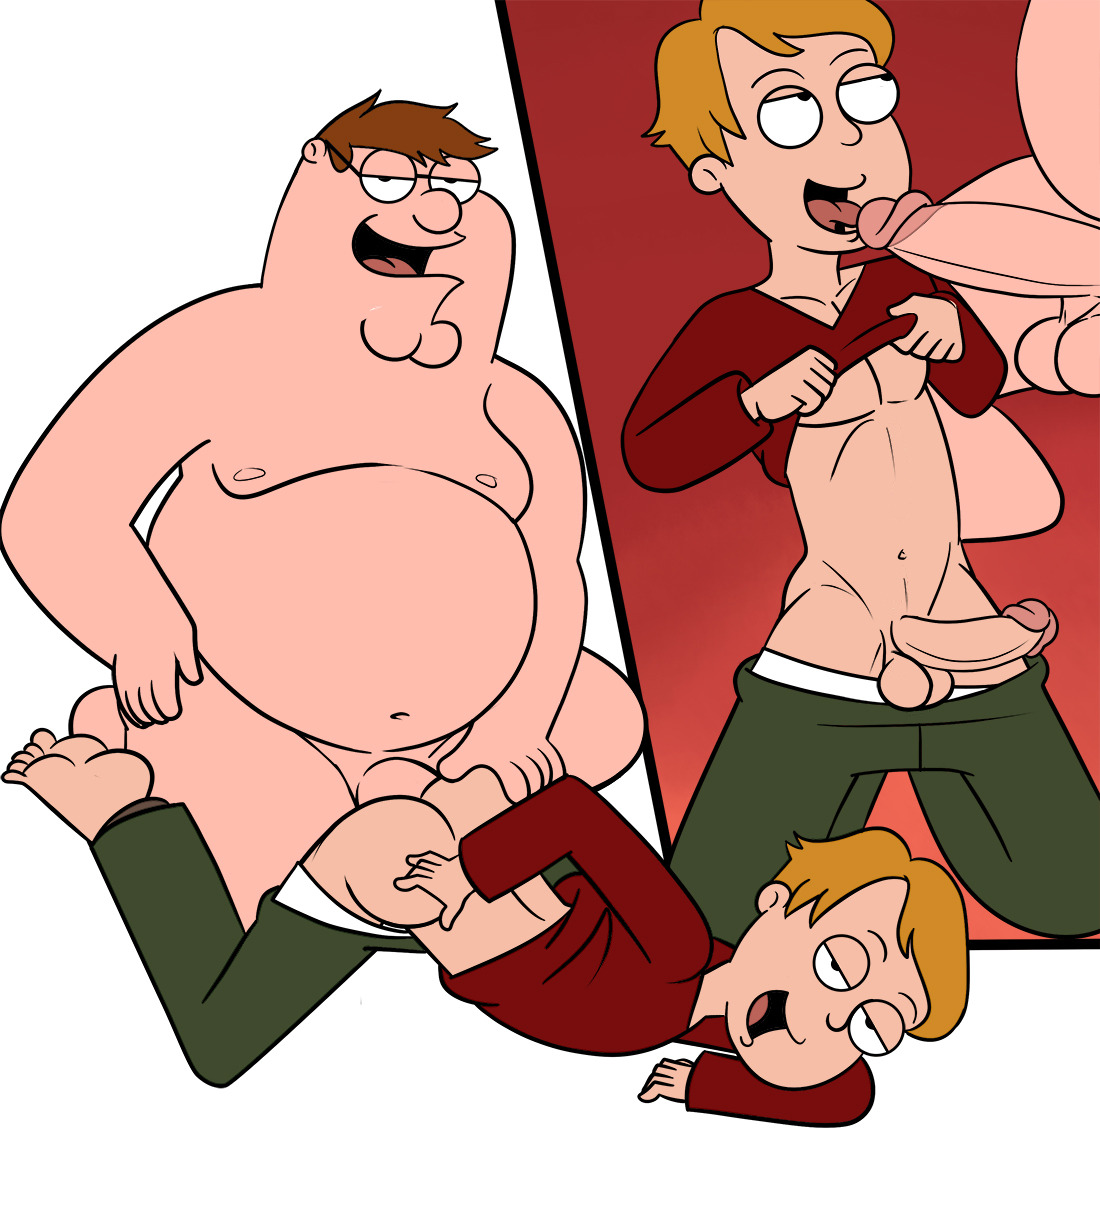 2309803 - Family_Guy Peter_Griffin iyumiblue.jpg.